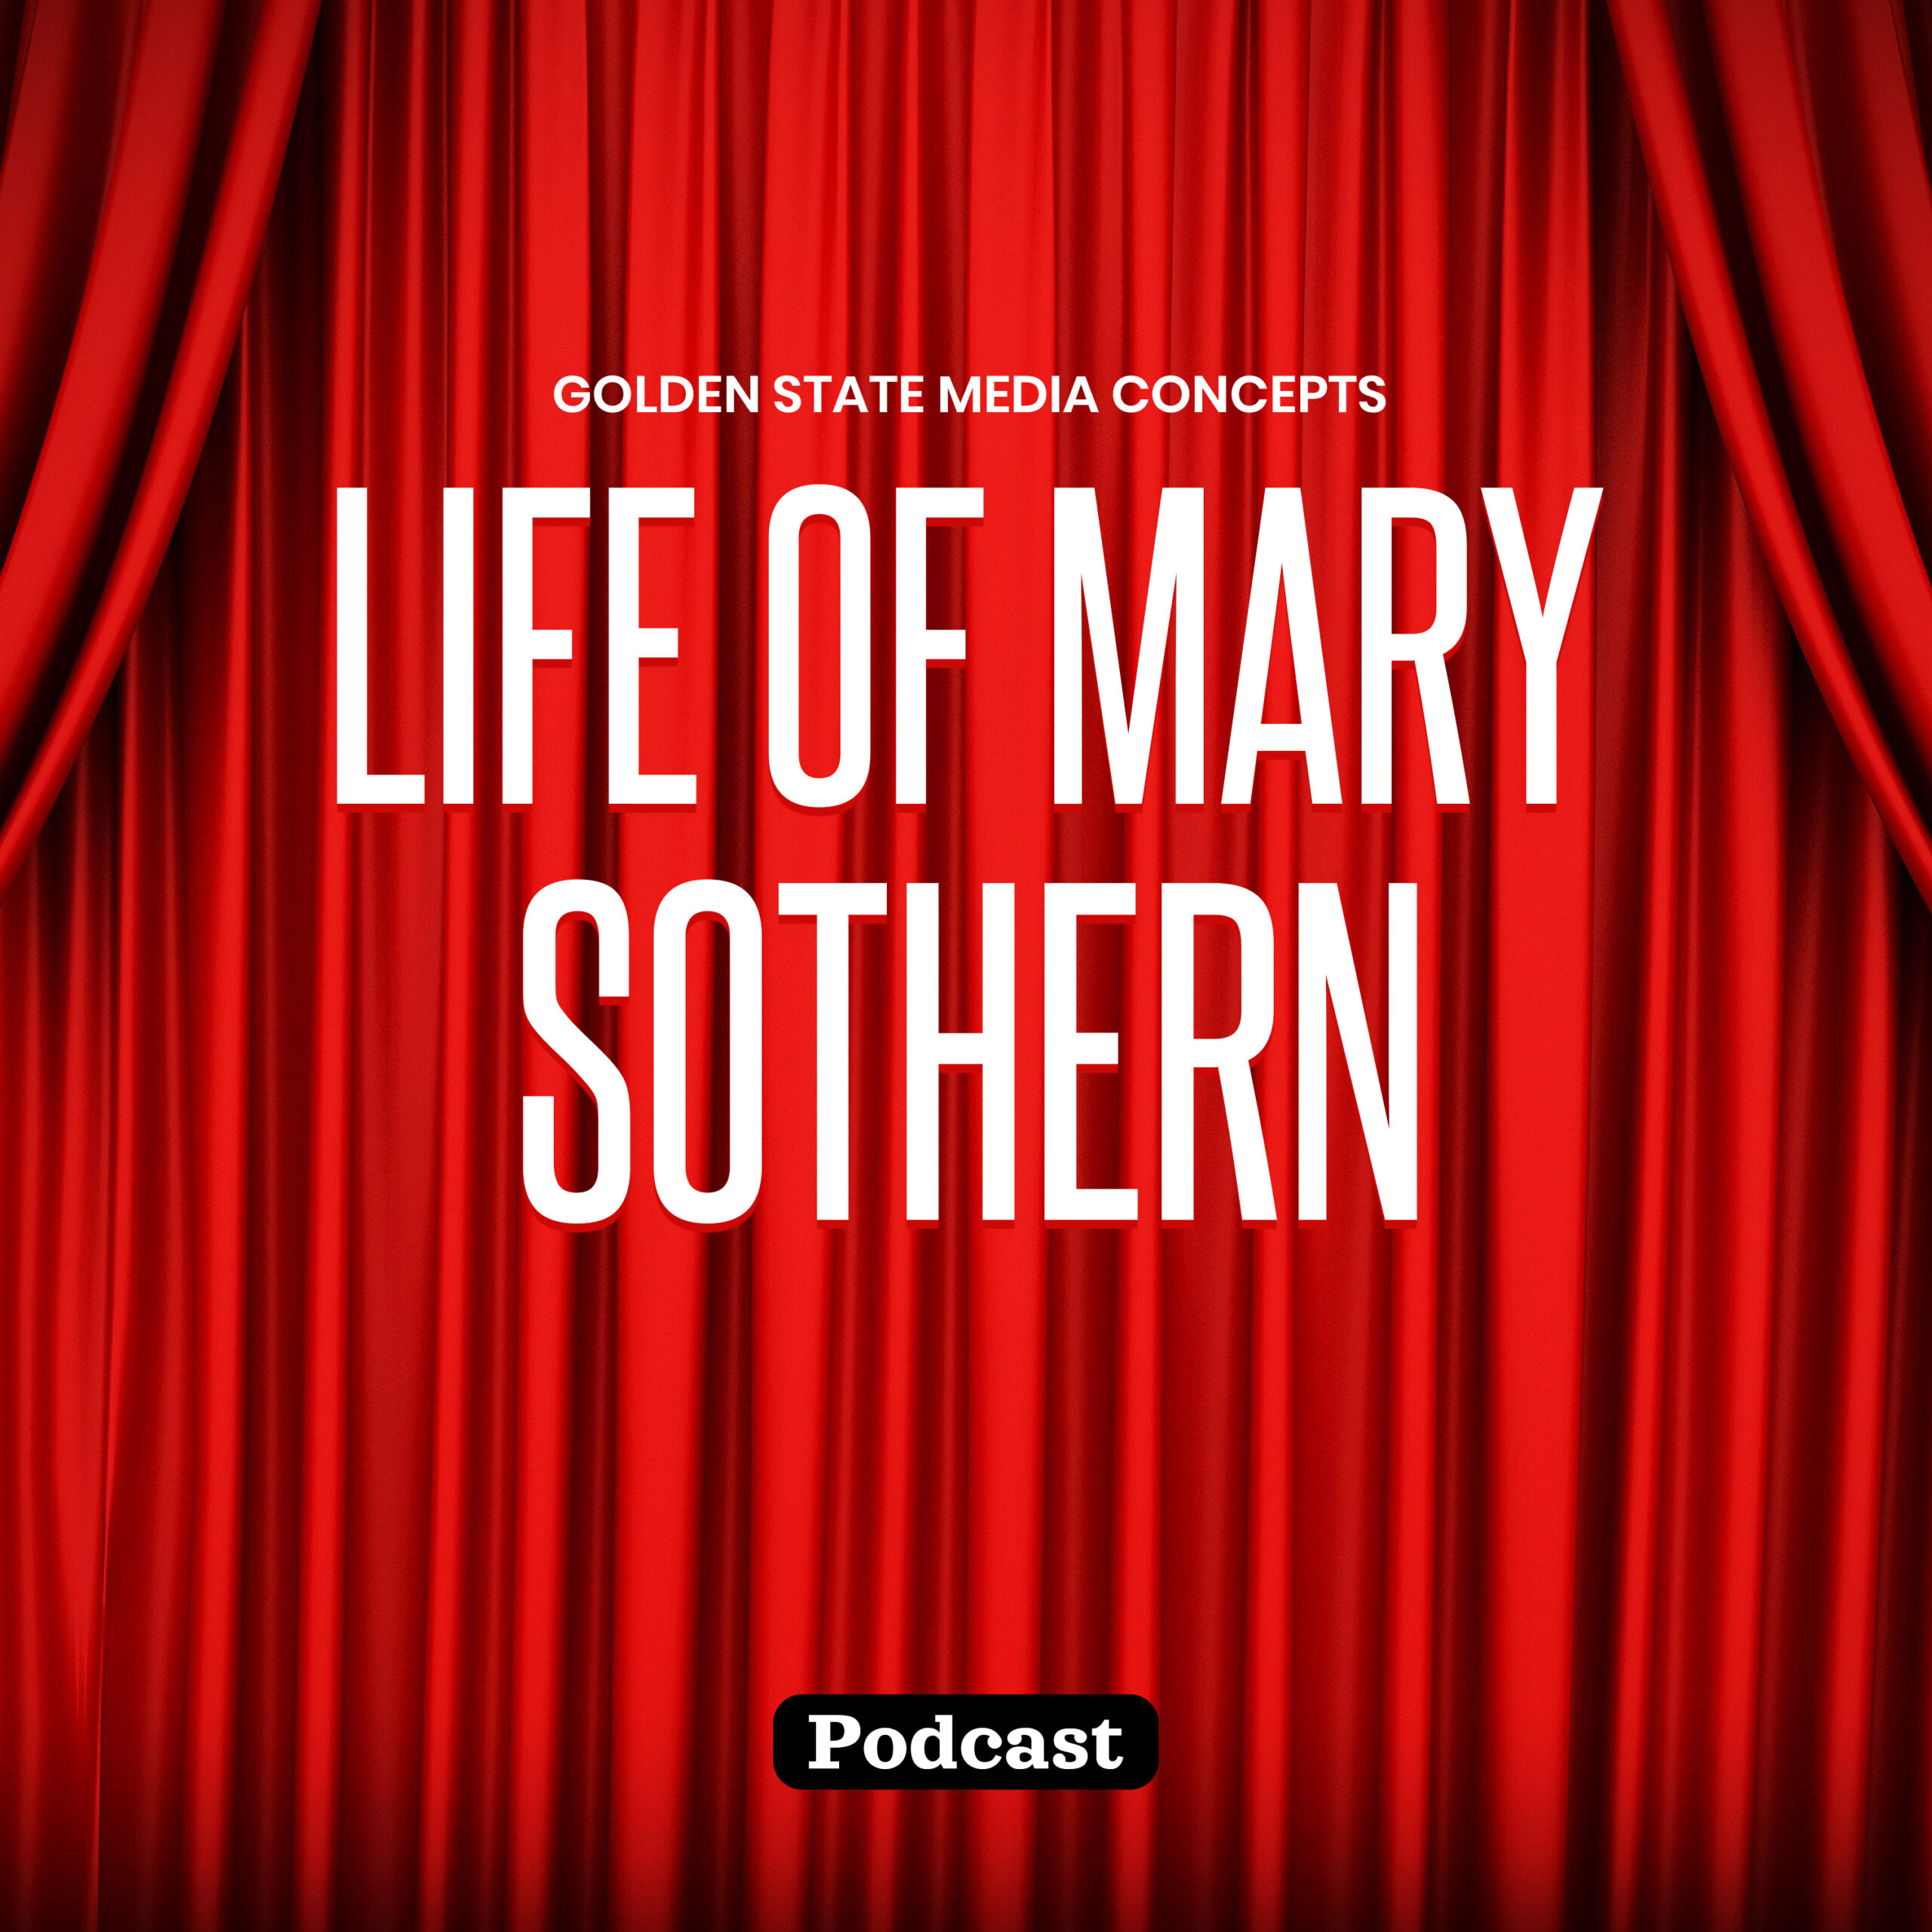 Life of Mary Sothern show